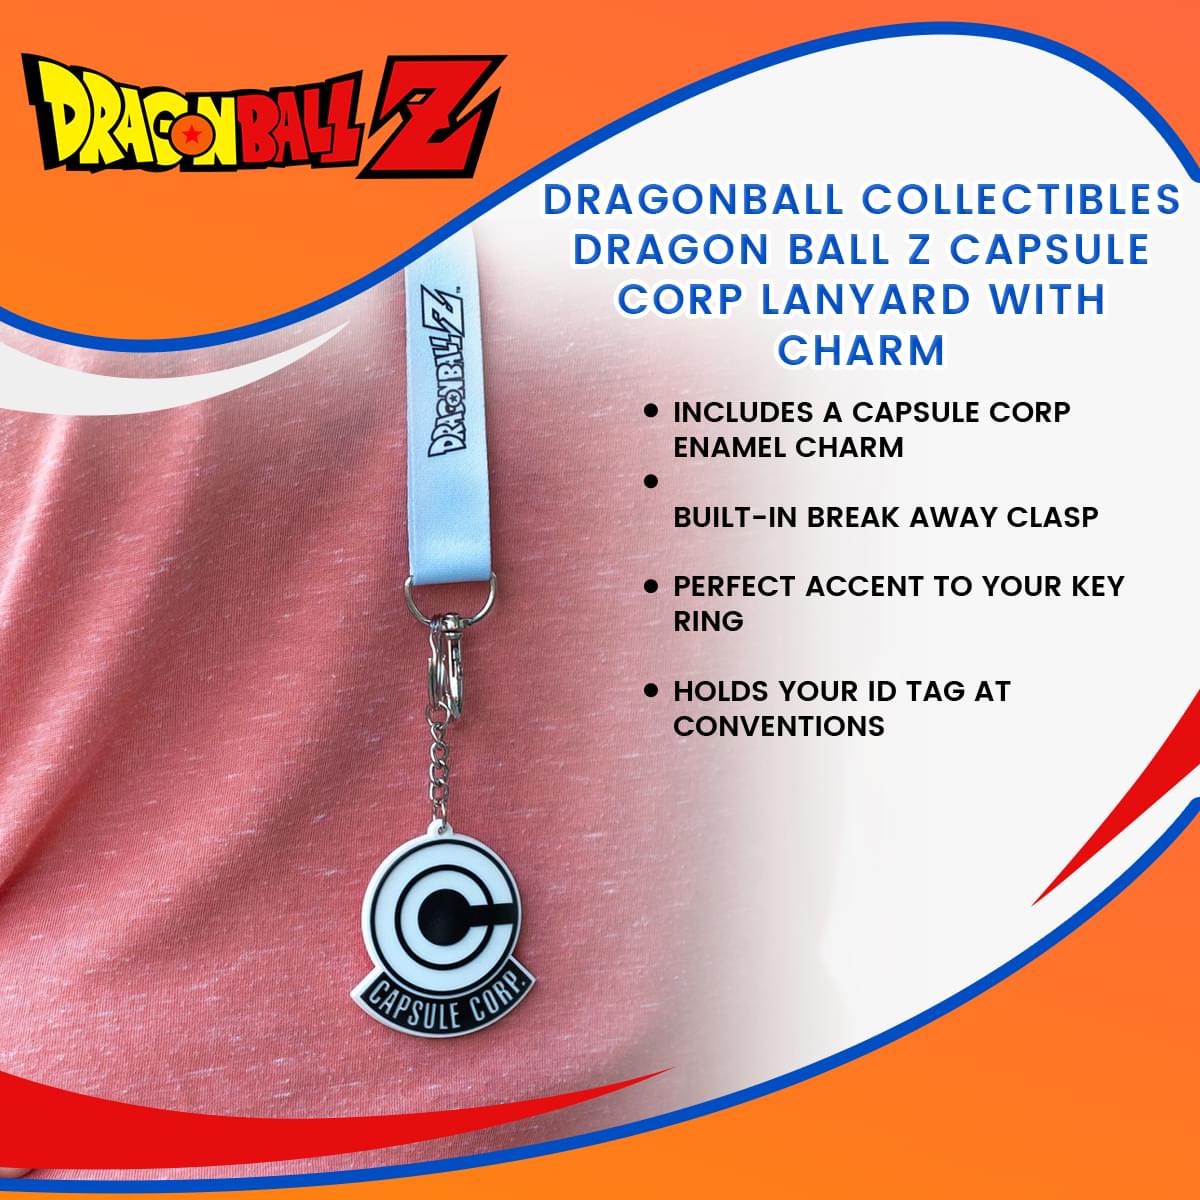 Dragonball Collectibles | Dragon Ball Z Capsule Corp Lanyard with Charm